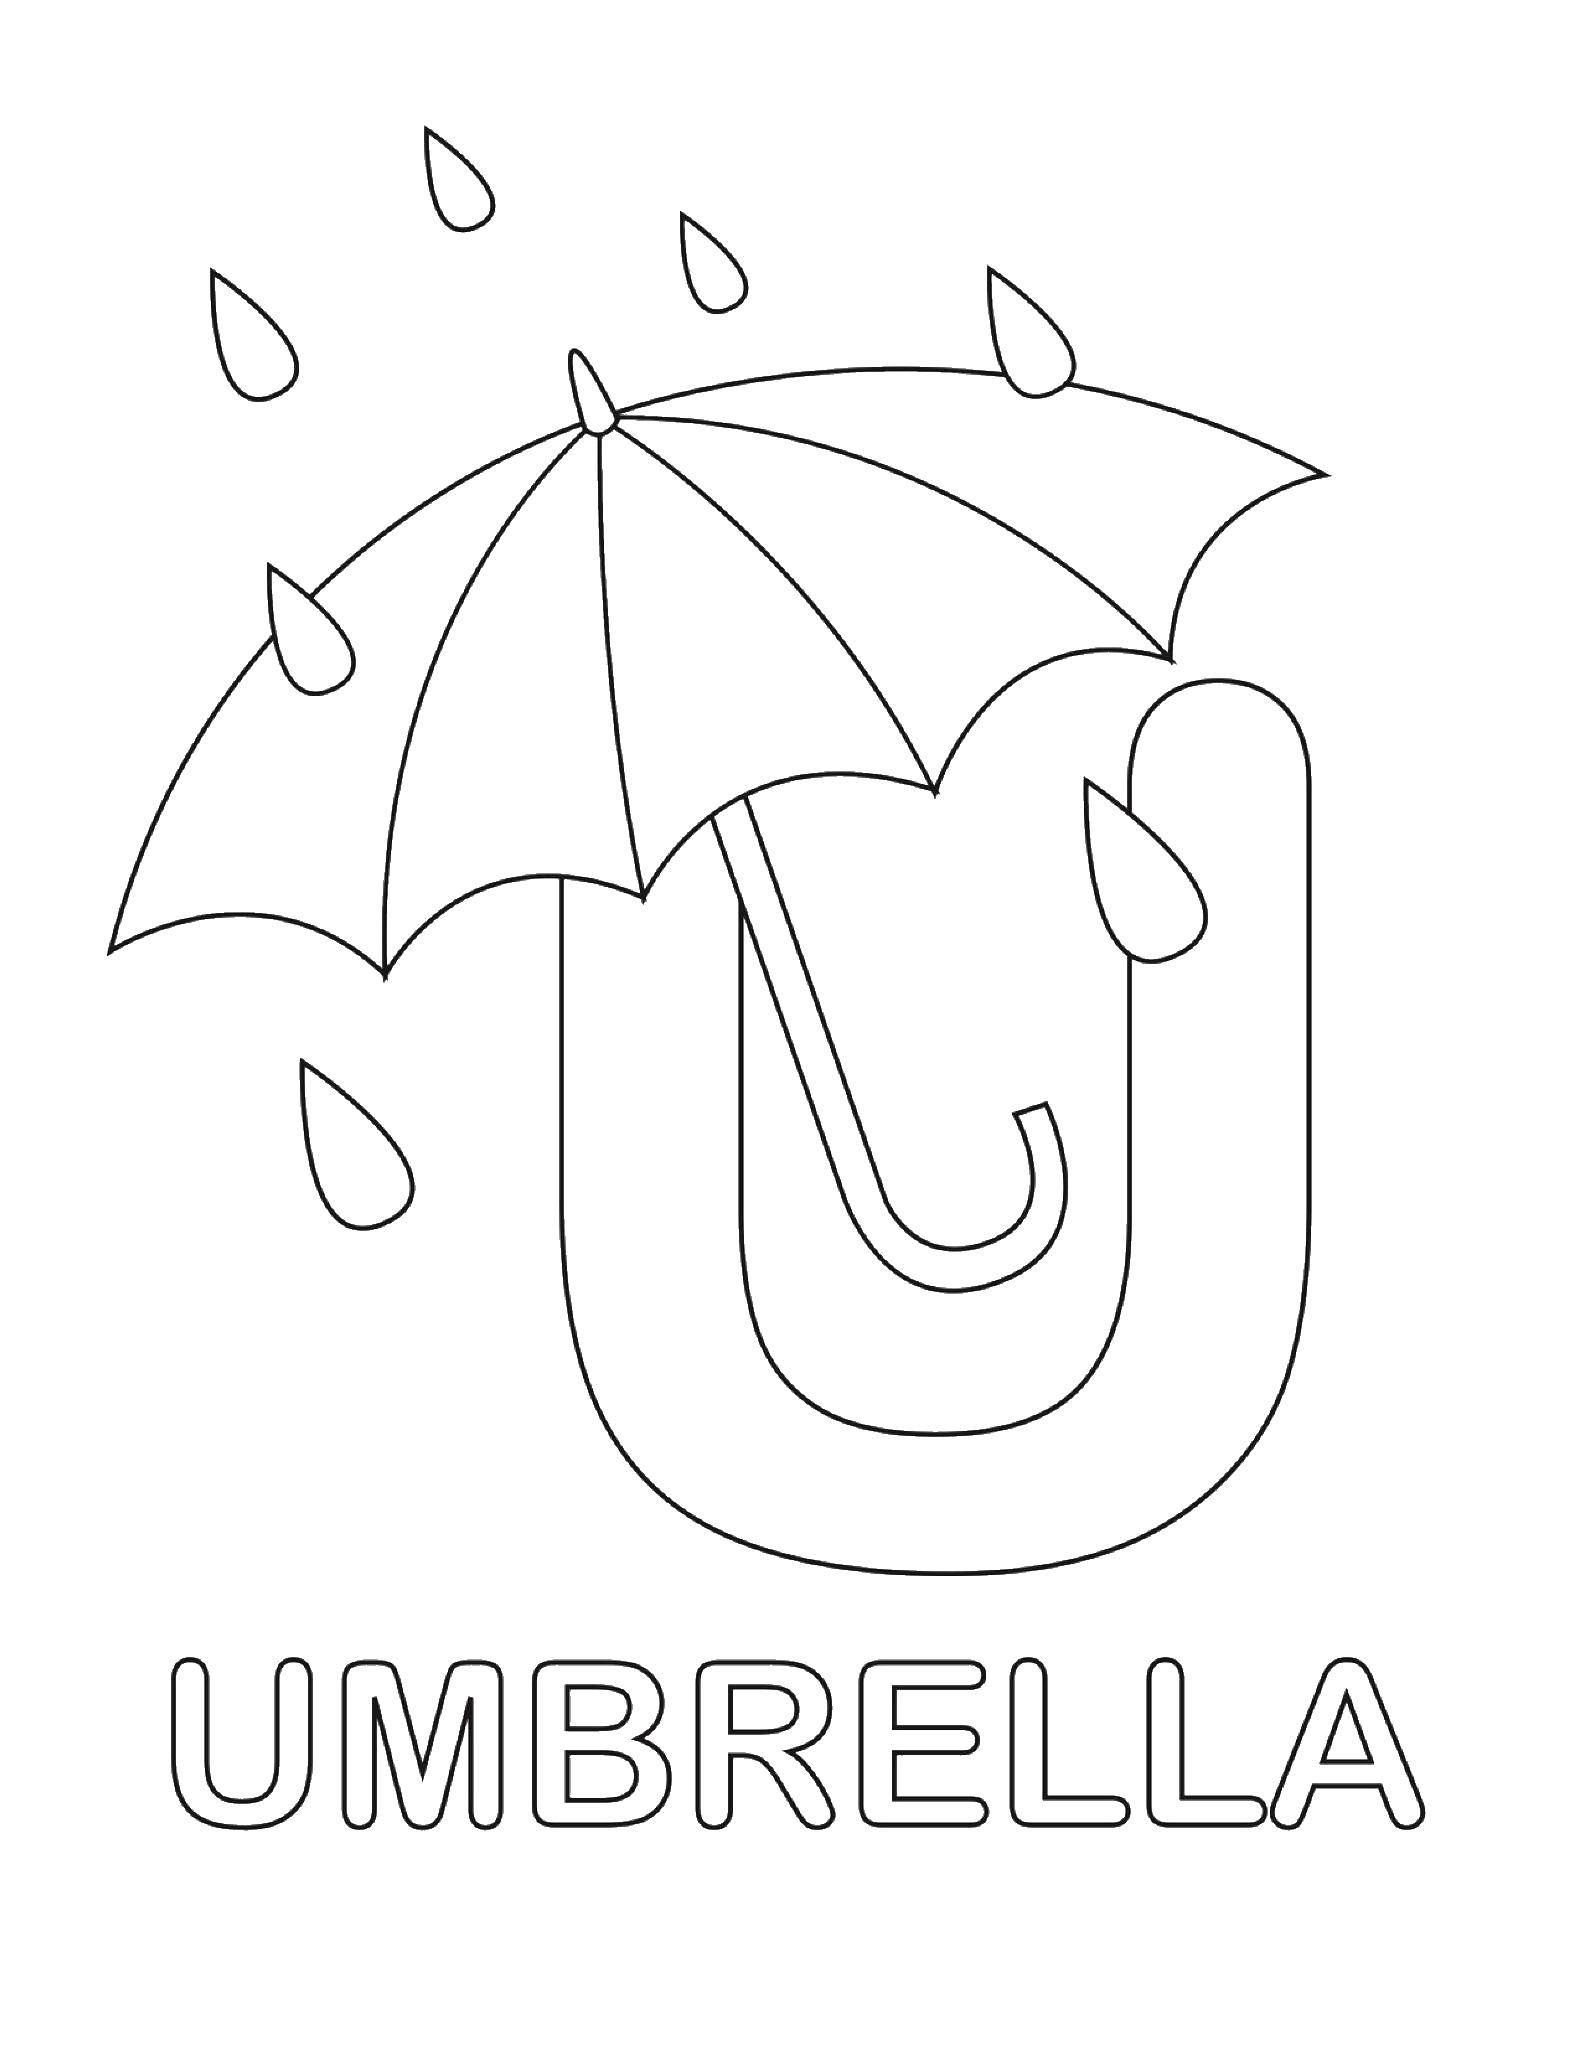 Coloring Umbrella. Category English words. Tags:  English words, umbrella.